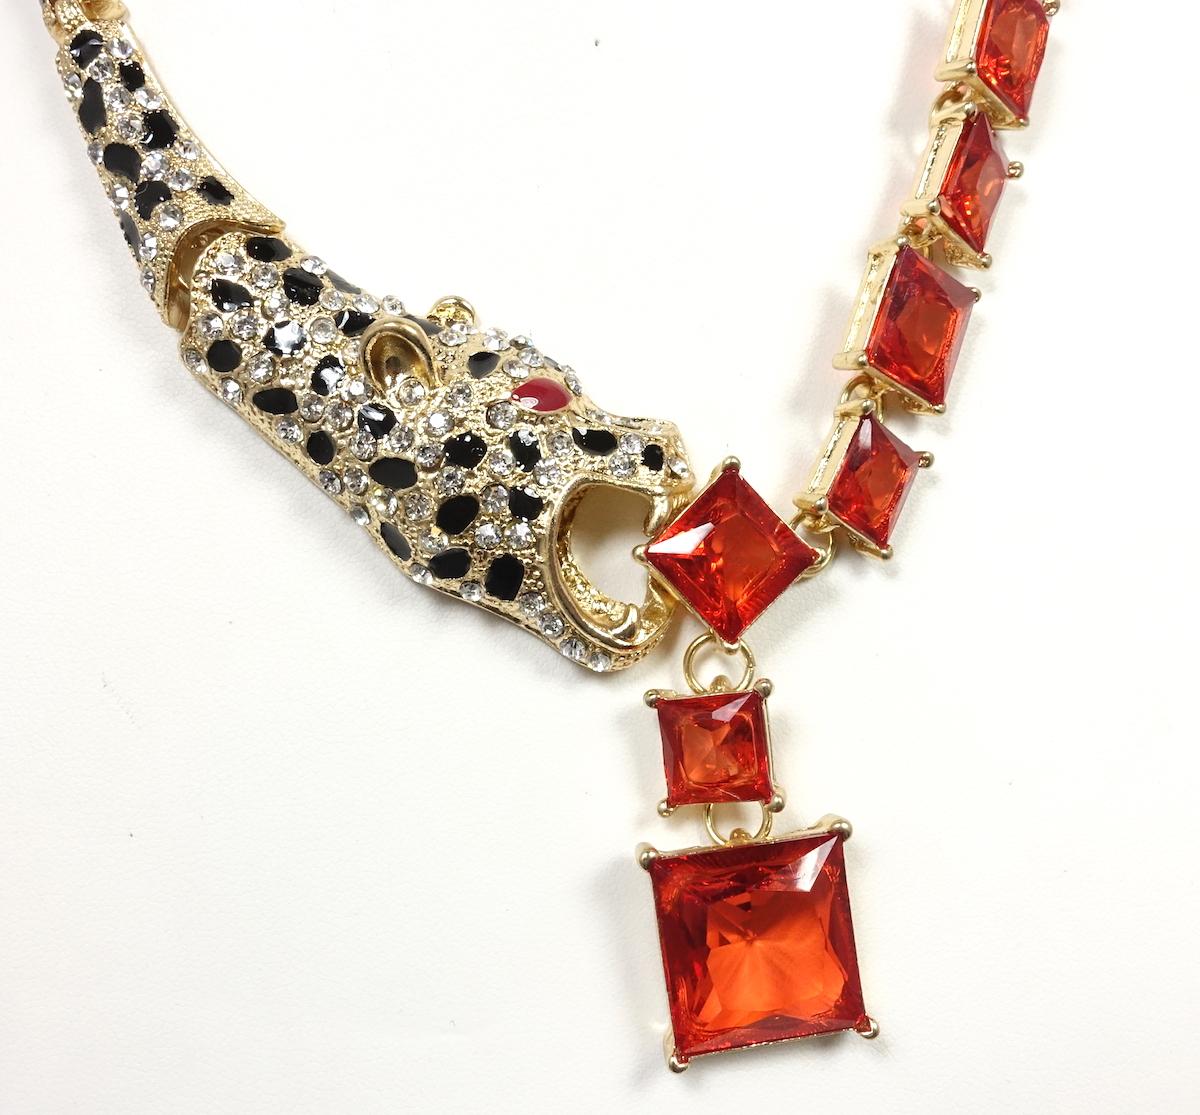 This necklace is made with a gold tone metal with the leopard’s mouth capturing red crystal squares.  The links to this necklace have the leopard’s body encrusted with rhinestones with black enamel dots right up to the fold-over clasp.  This